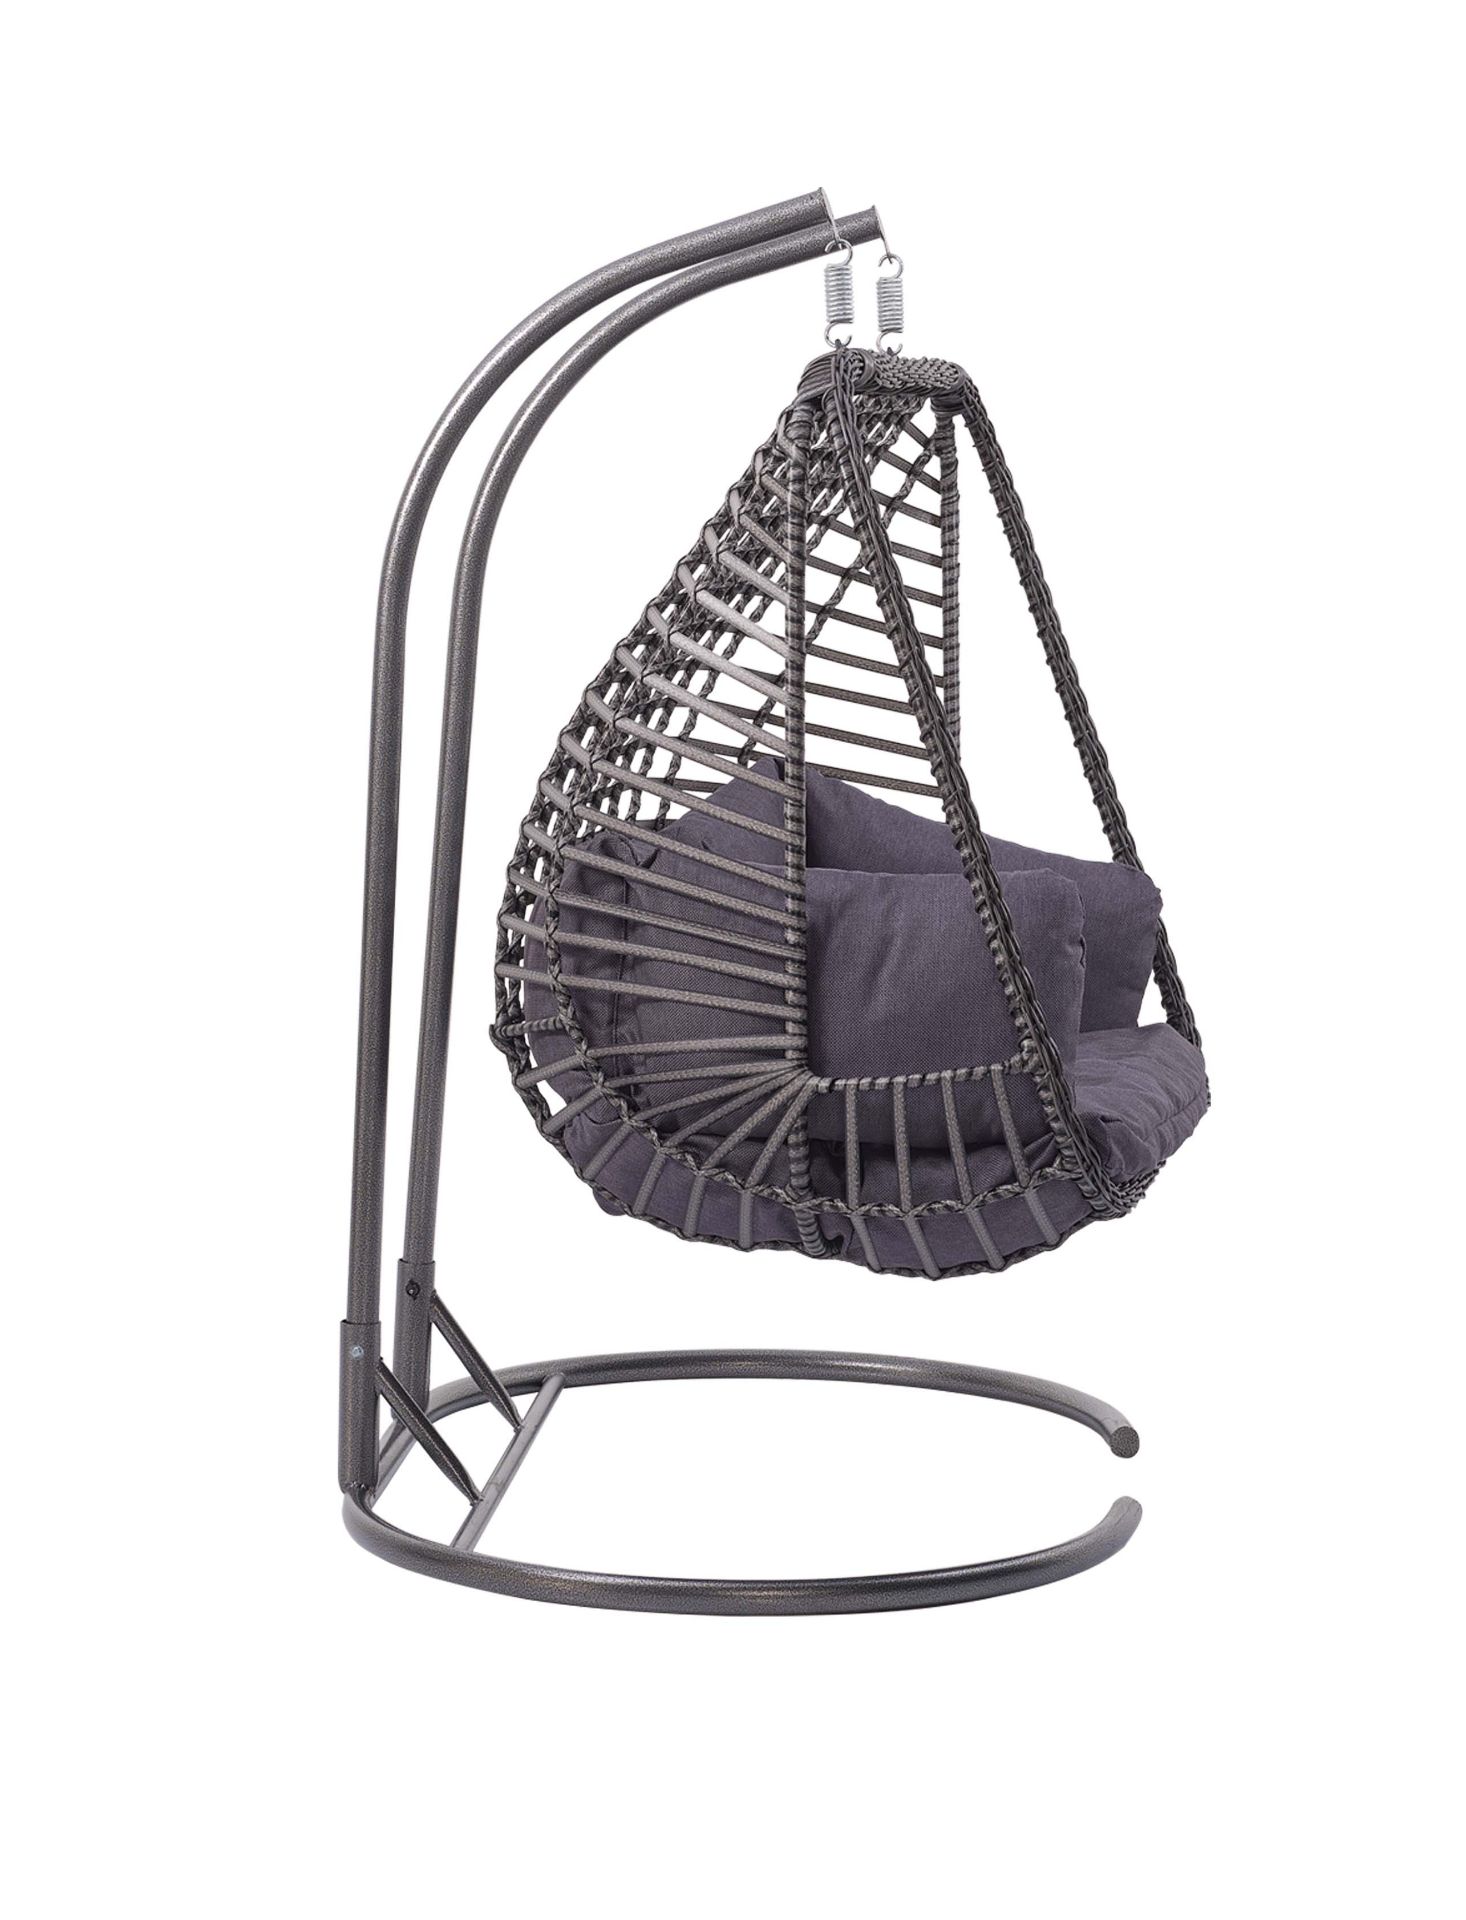 + VAT Brand New Chelsea Garden Company Rattan Double Hanging Swing Chair - Item is Available Approx - Image 2 of 2